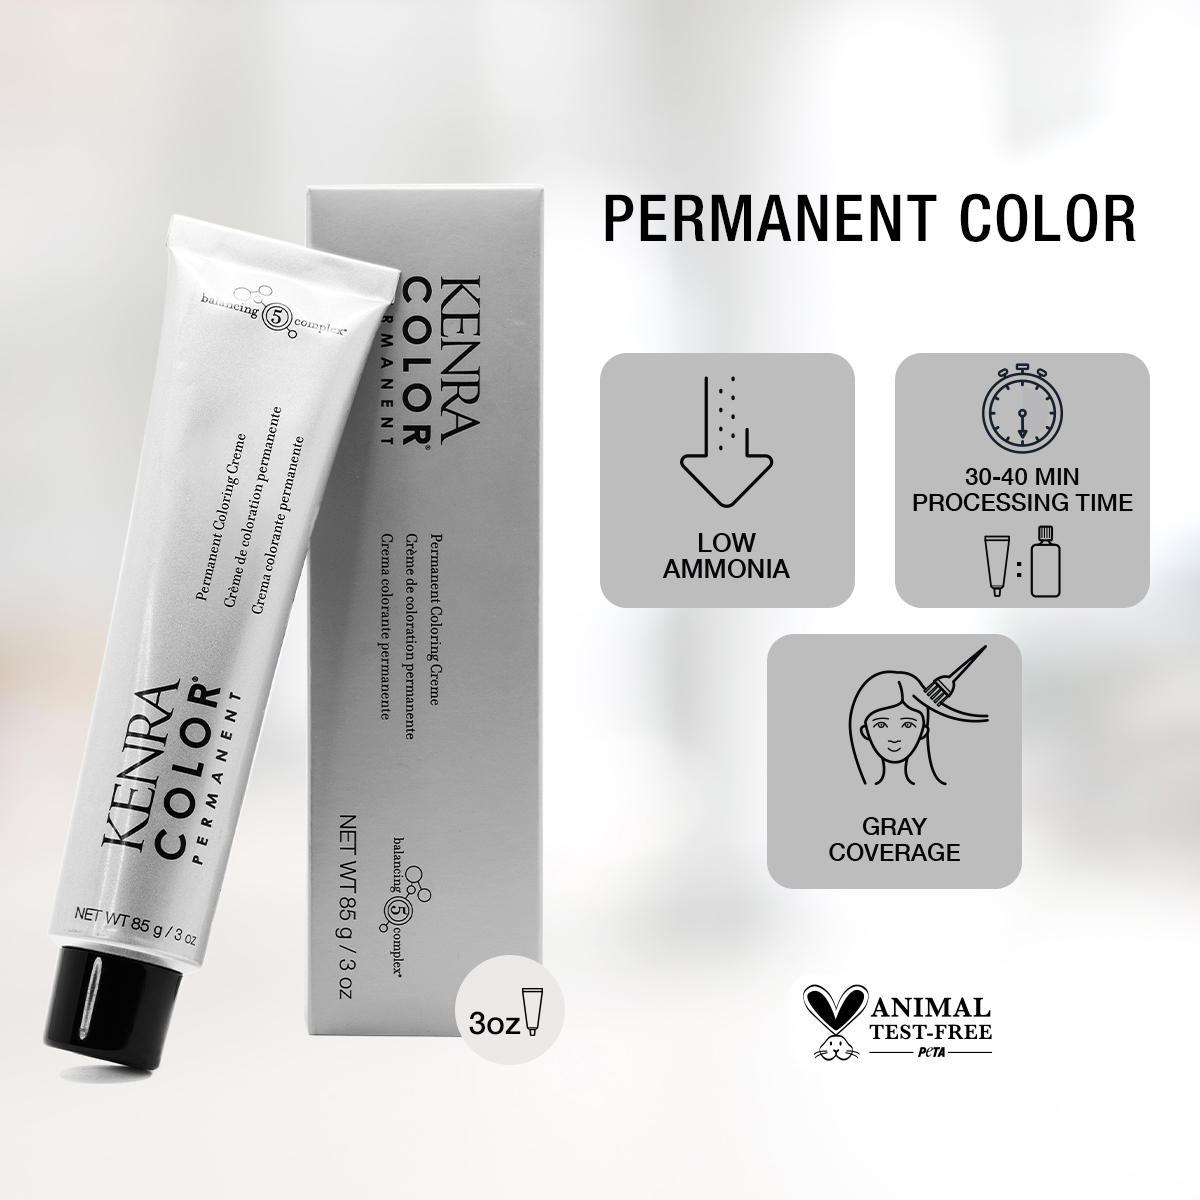 KenraColor permanent Infographic